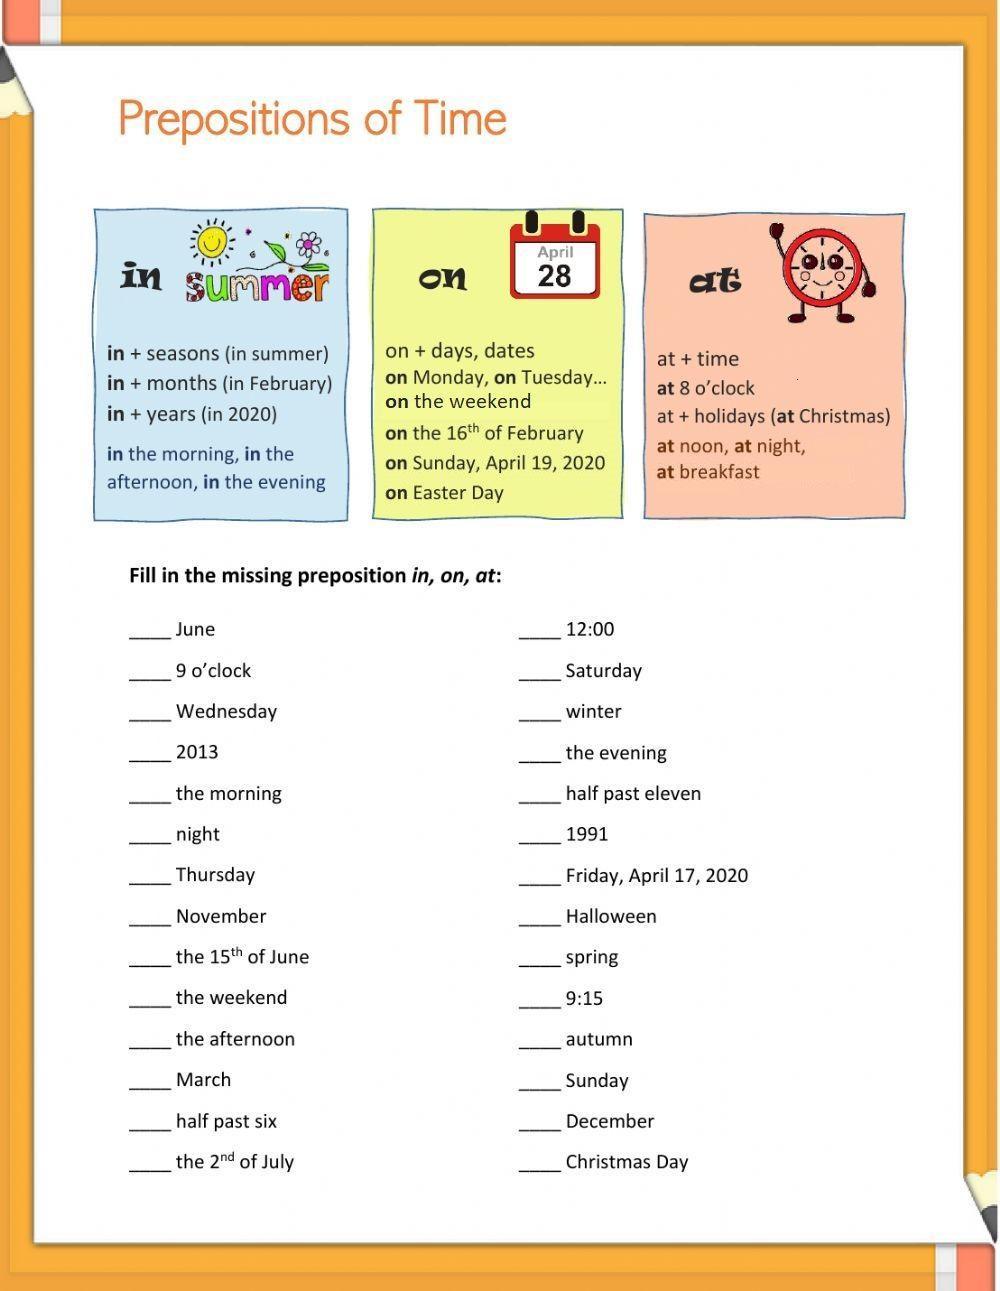 Prepositions of Time - In, At, On Grammar Focus